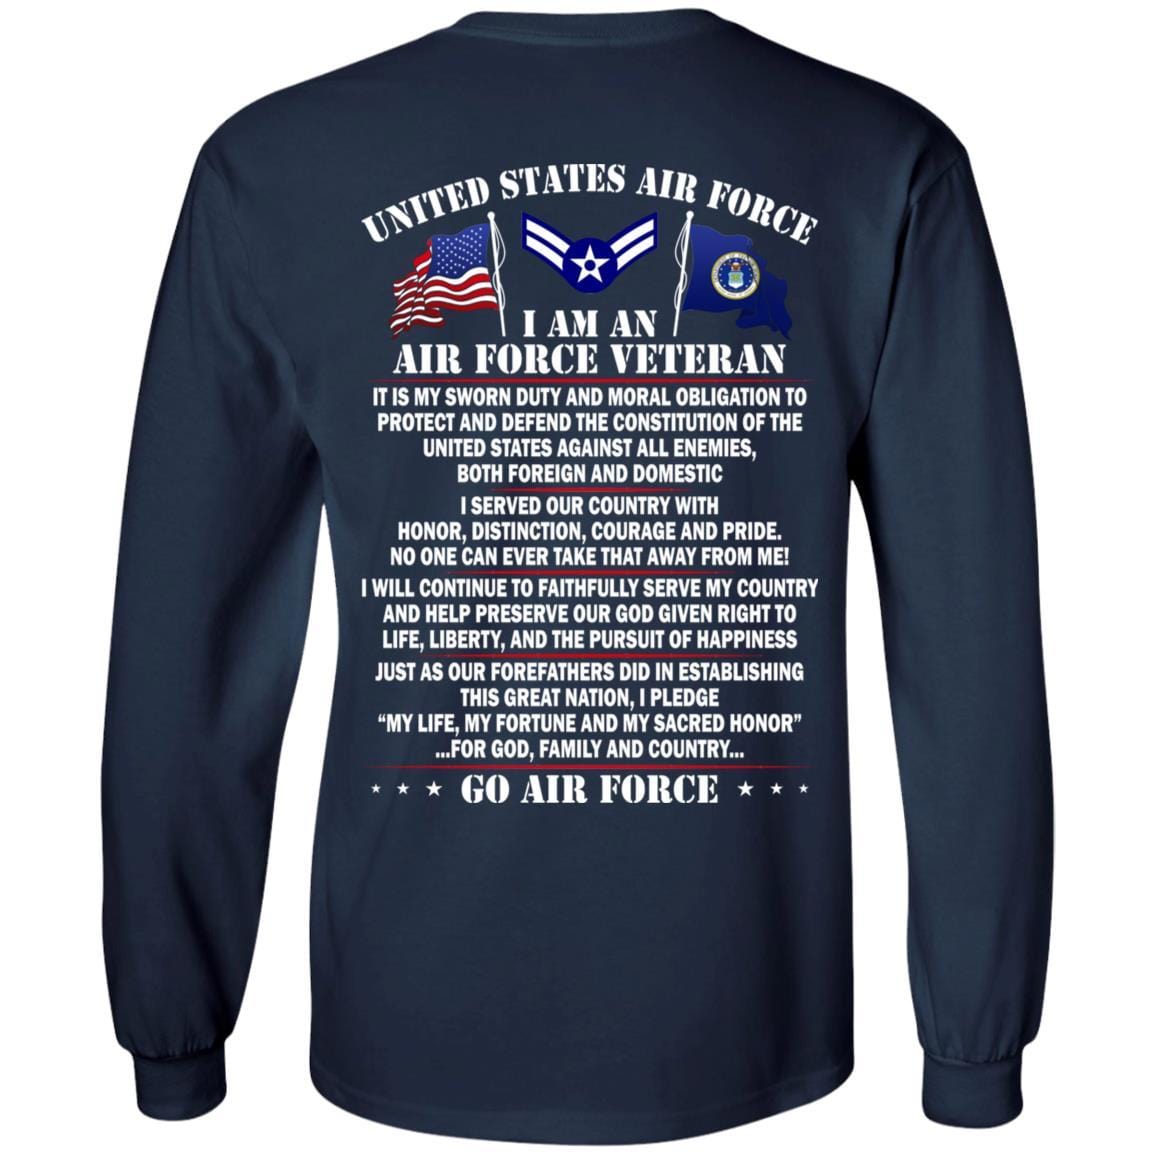 US Air Force E-3 Airman First Class A1C E3 Ranks Enlisted Airman AF Rank - Go Air Force T-Shirt On Back-TShirt-USAF-Veterans Nation